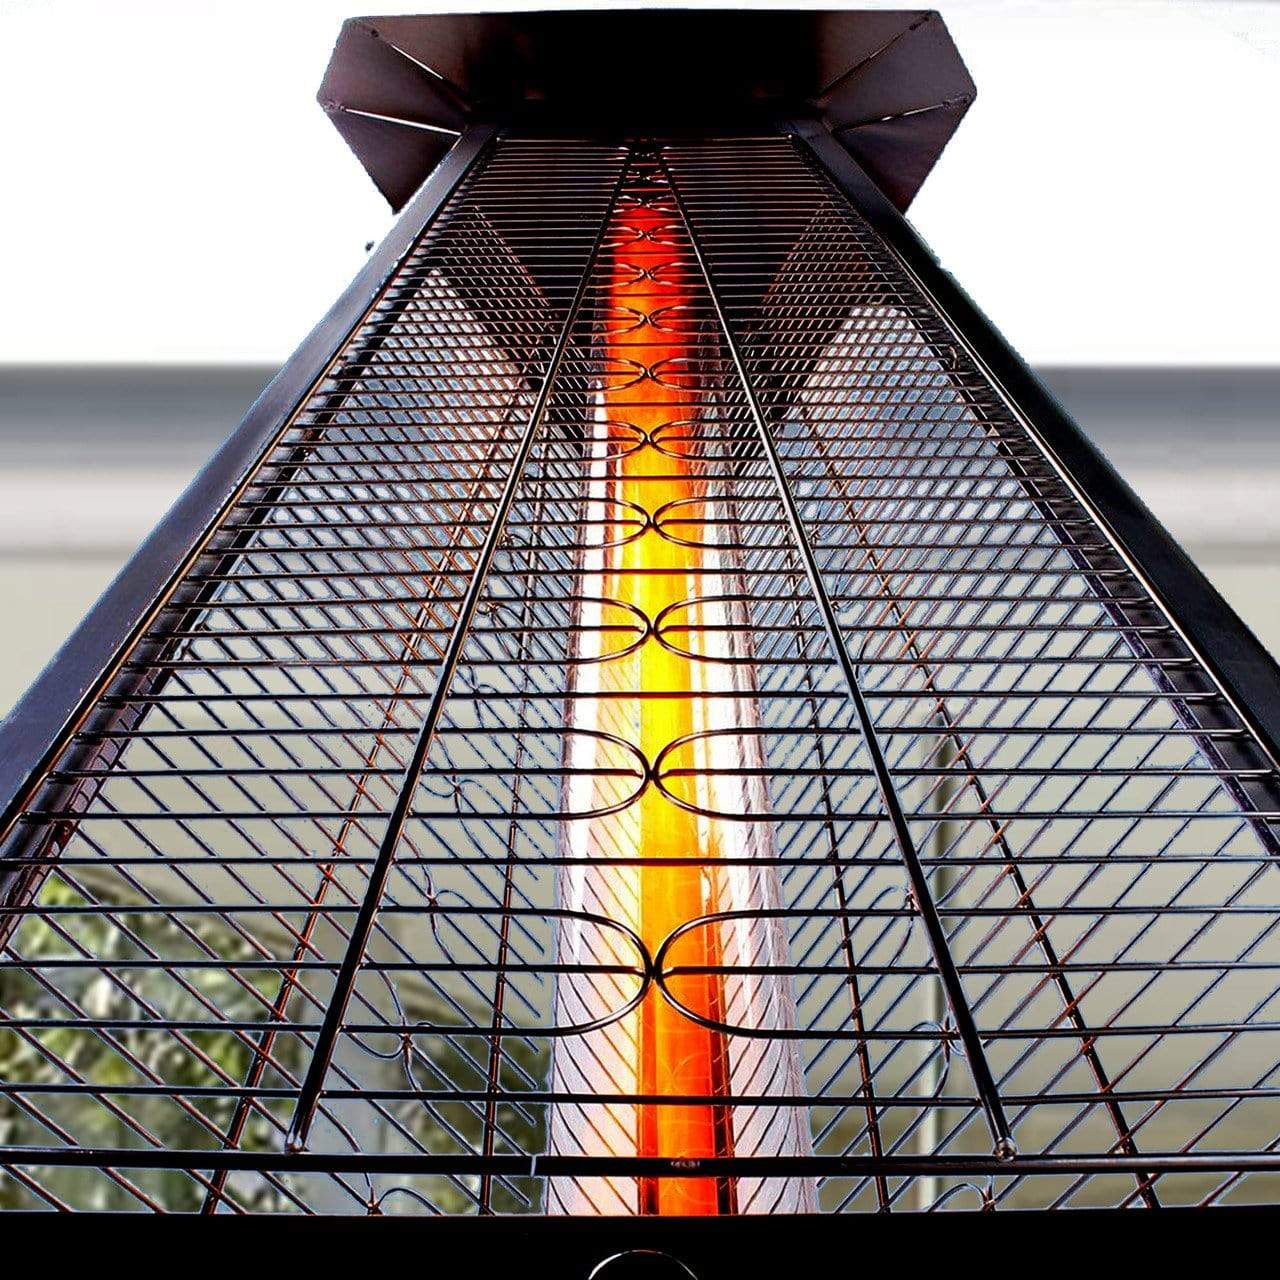 Lava Heat Italia Tower Patio Heater The 2G Triangle Flame Tower Heater, 92.5", 66,000 BTU, Remote Control, Push Button Ignition, Stainless Steel, Bronze, Black, Liquid Propane or Natural Gas - ASSEMBLED